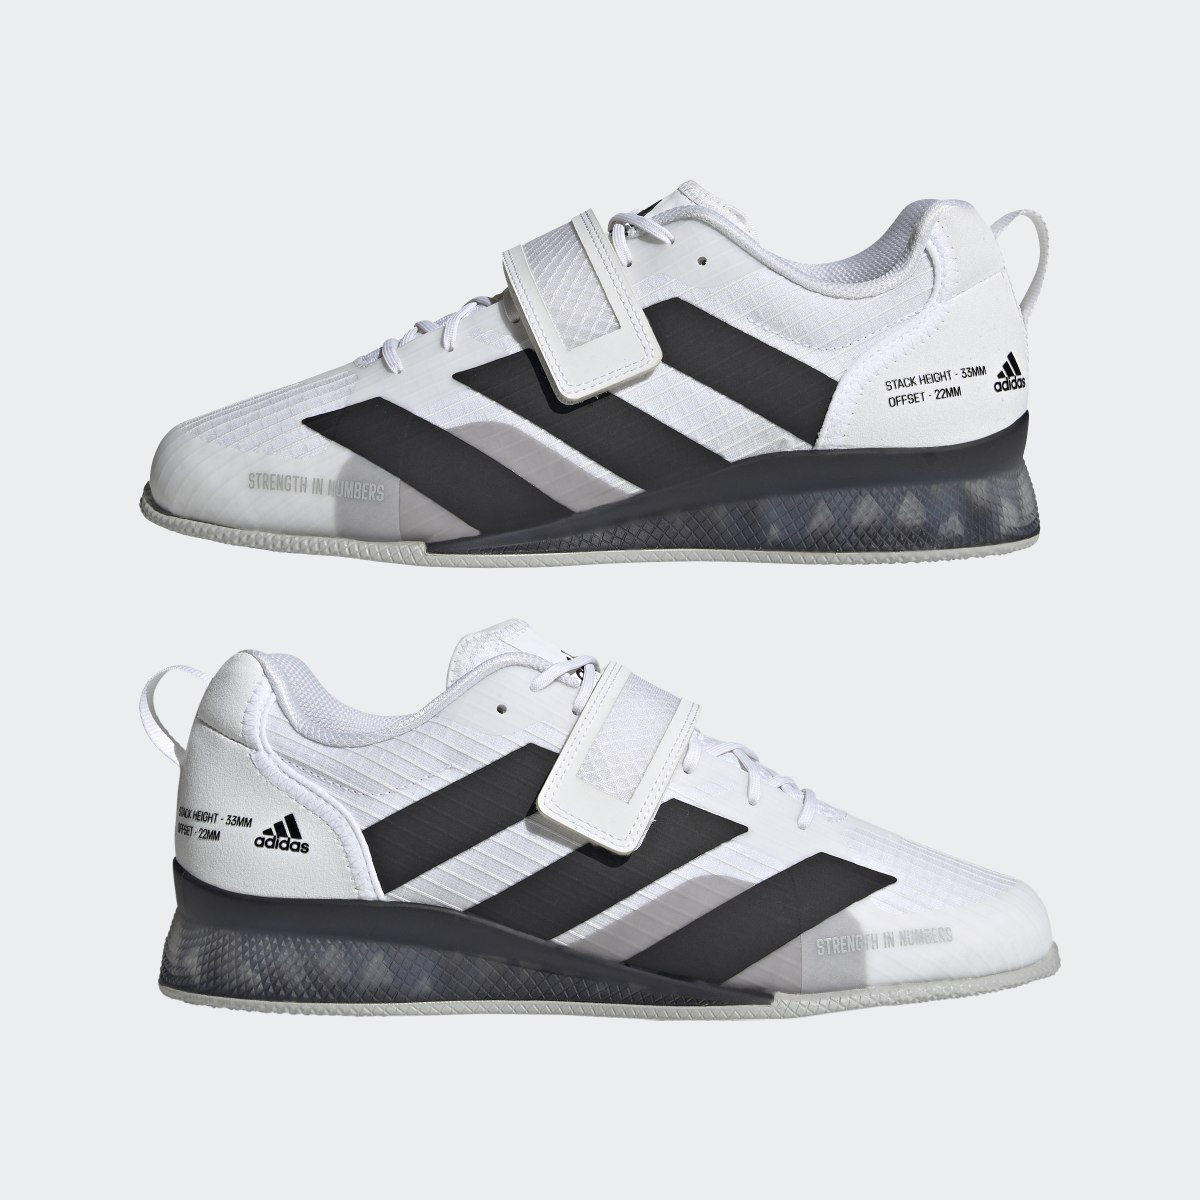 Adidas Adipower Weightlifting 3 Shoes. 8